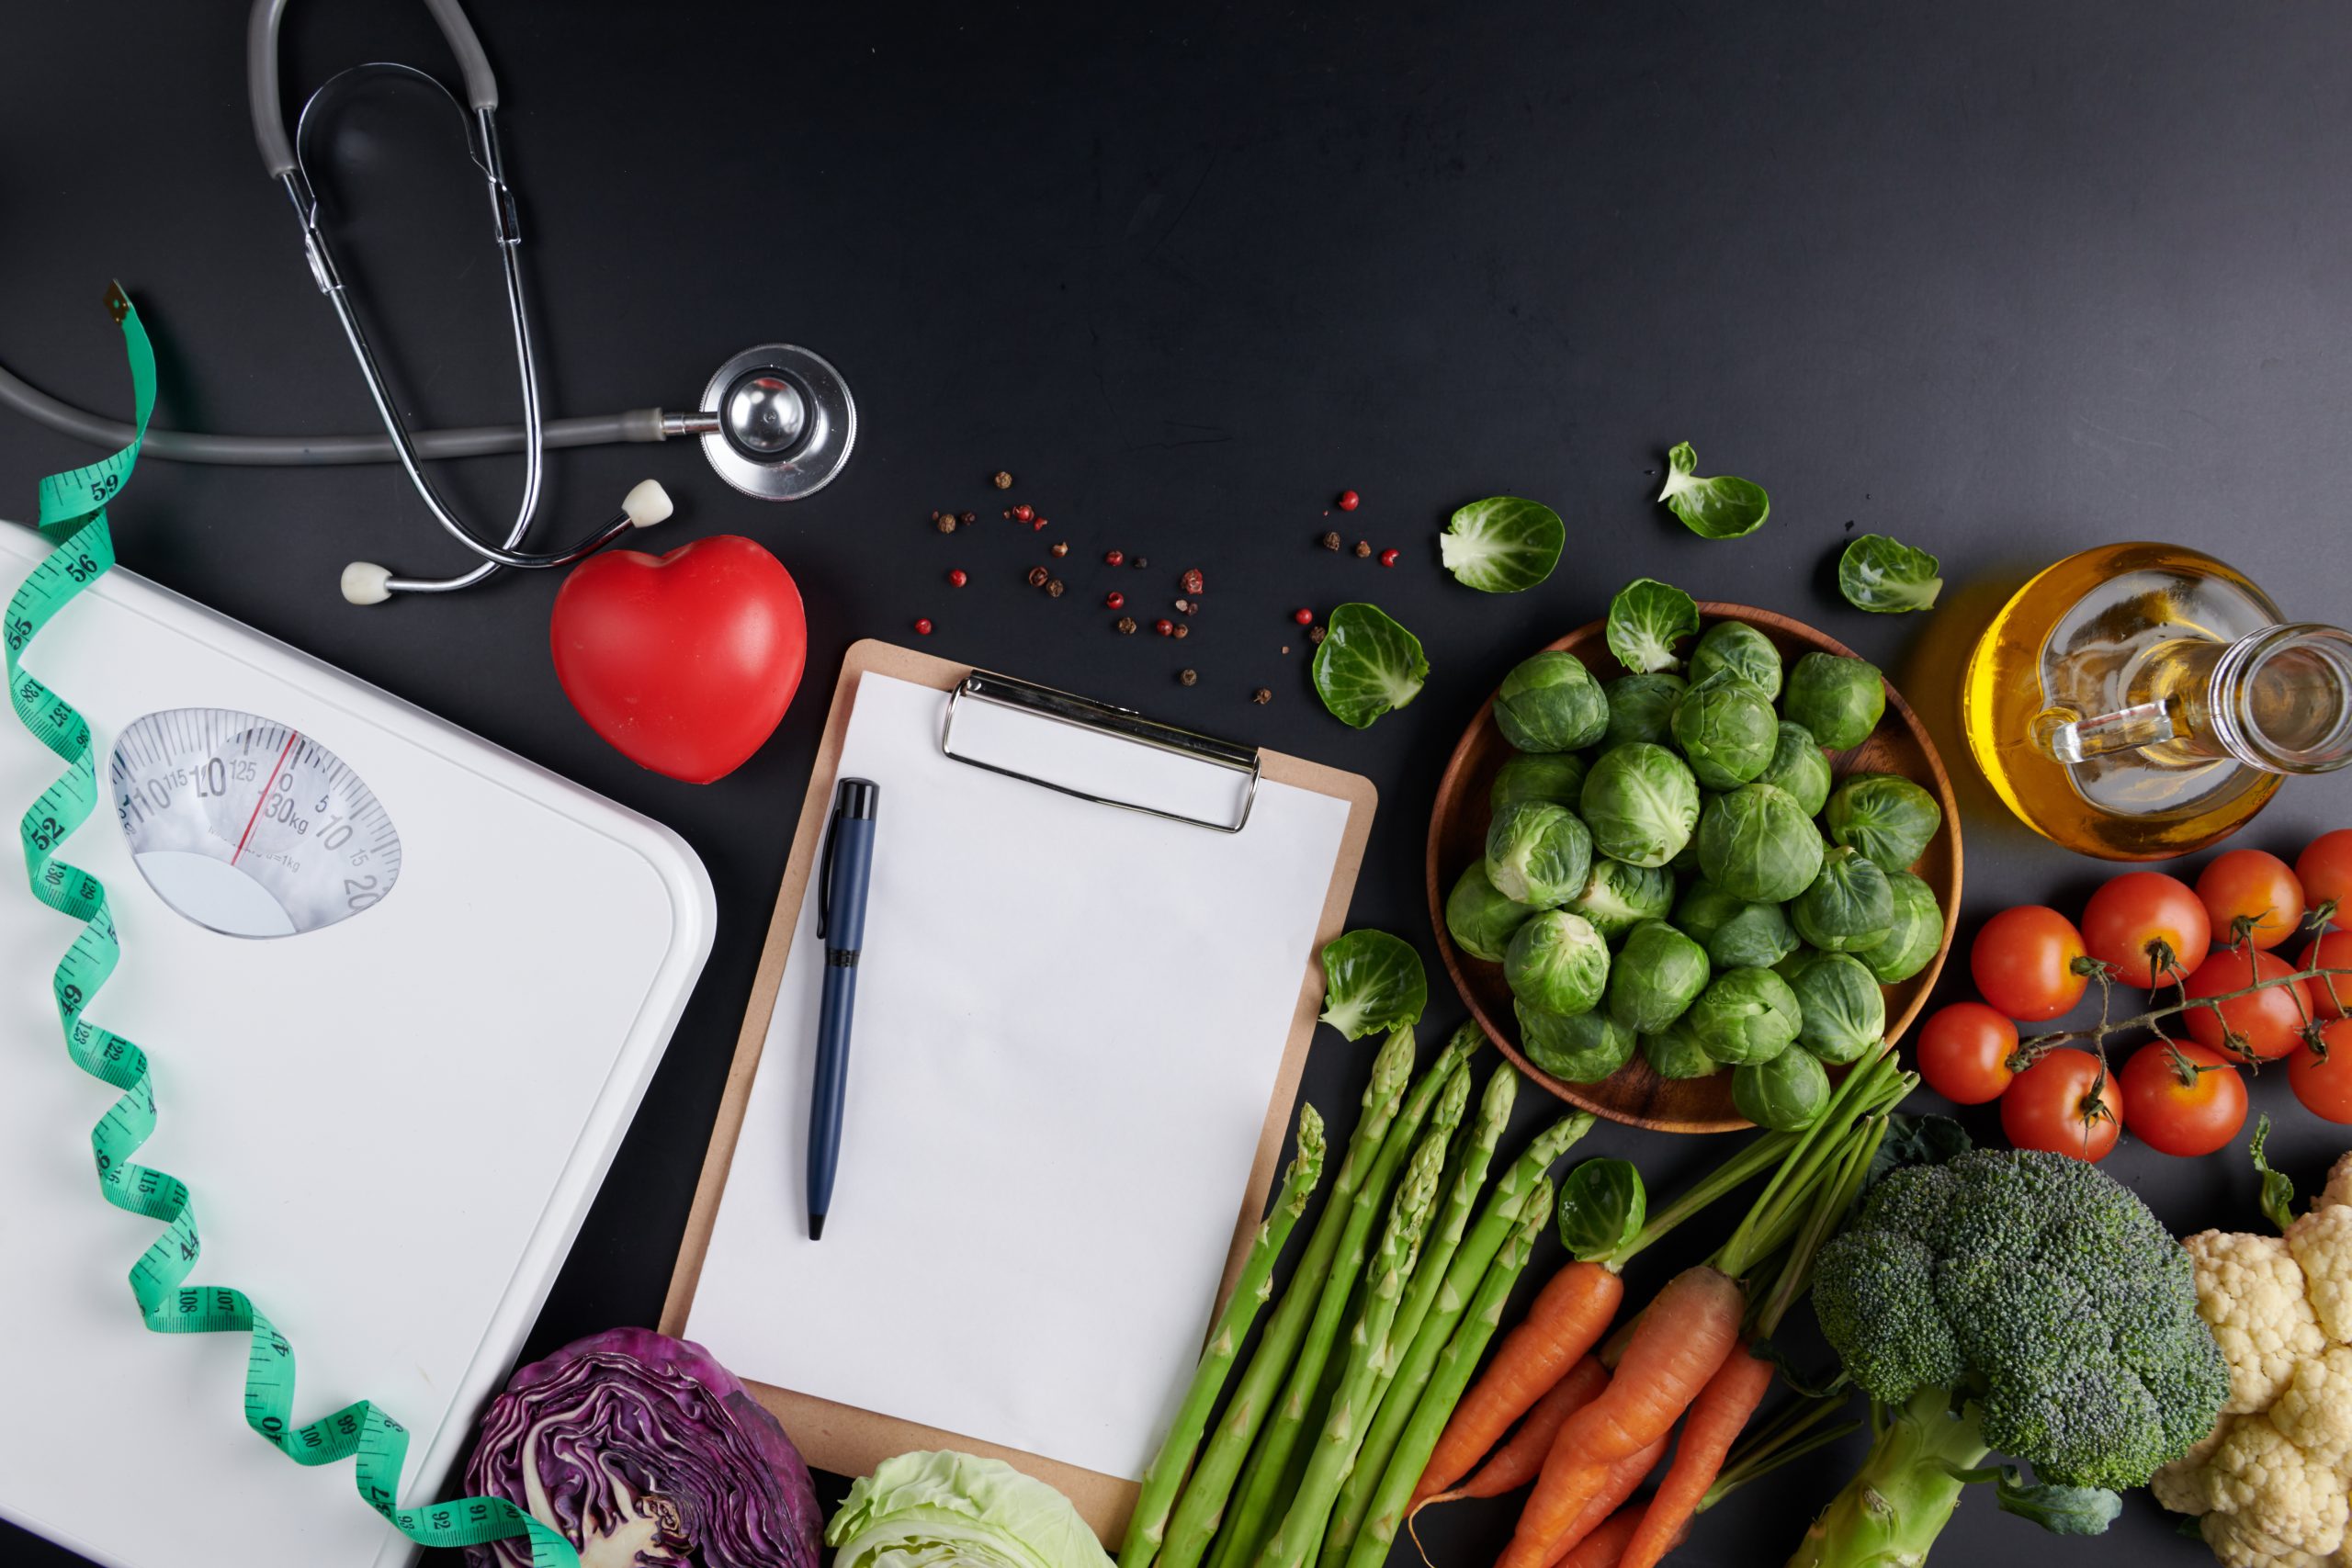 Weight loss scale with centimeter, stethoscope, Dumbbell, Clipboard, pen. Diet concept. Healthy food background. different fruits and vegetables, nuts. concept slimming diet fresh vegetables.